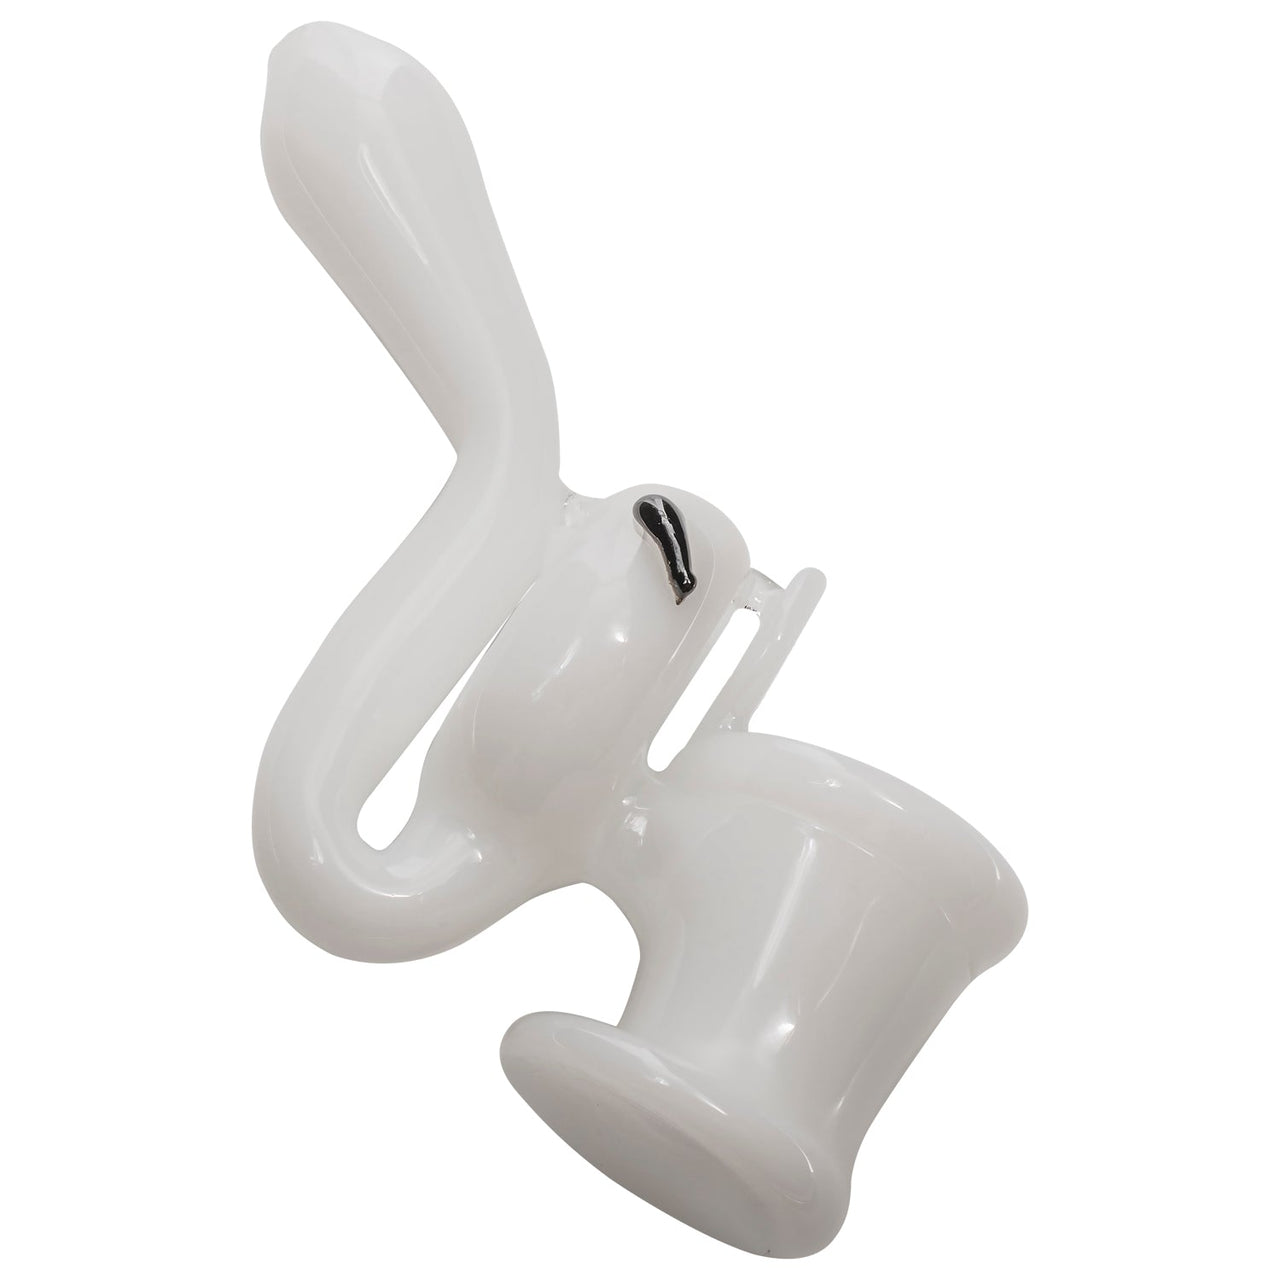 LA Pipes The Good Ish - Toilet Bowl Glass Pipe